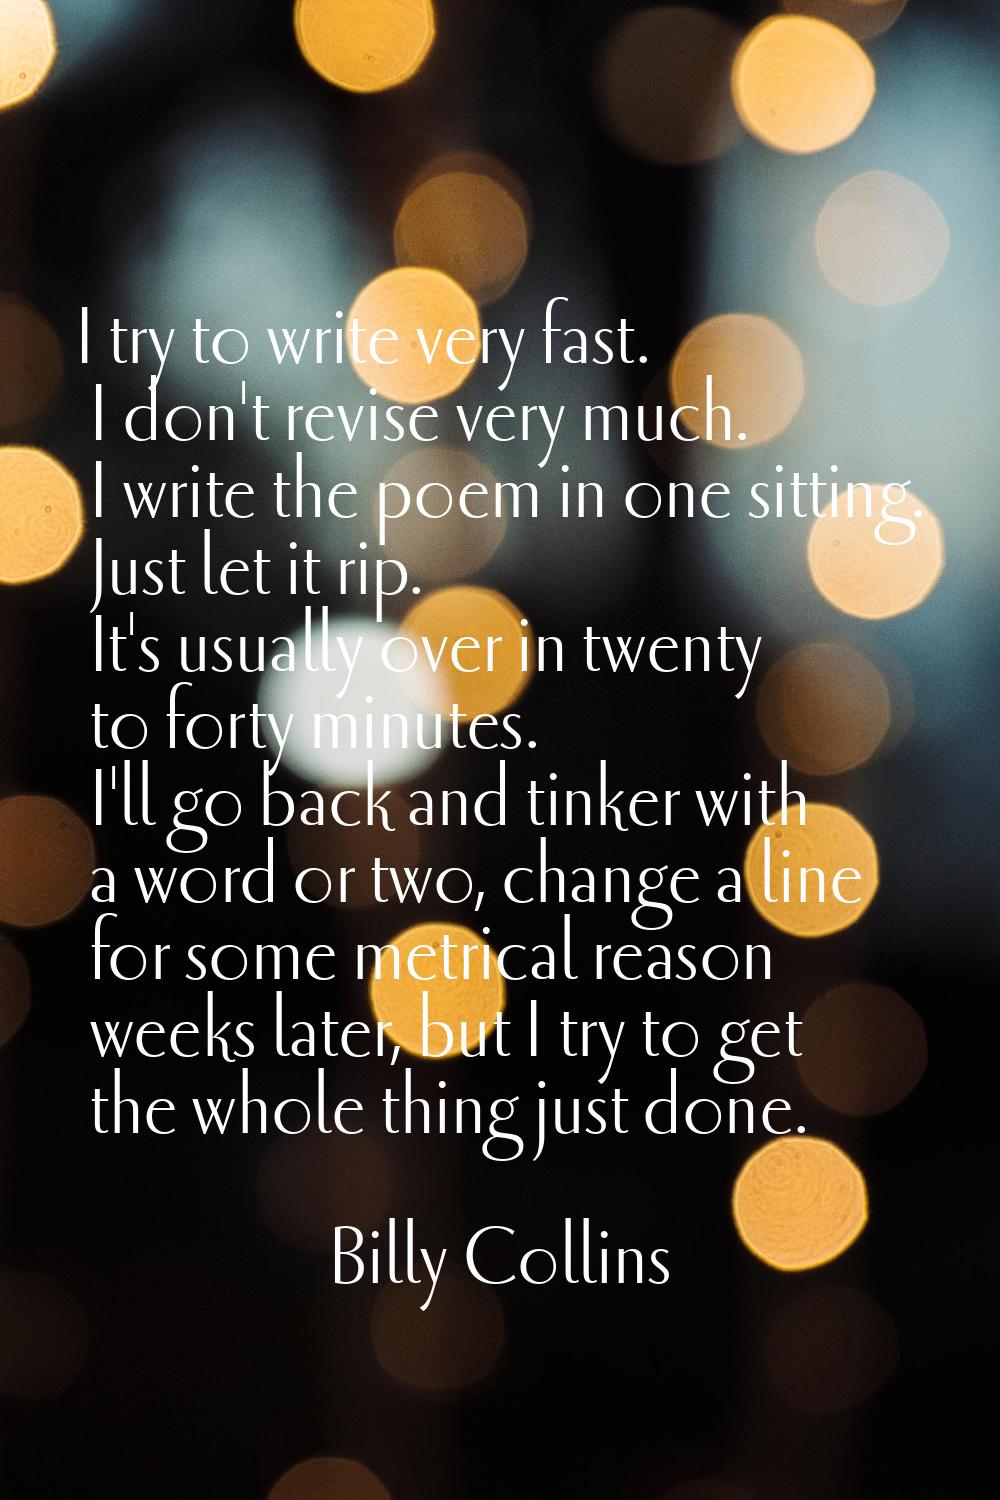 I try to write very fast. I don't revise very much. I write the poem in one sitting. Just let it ri